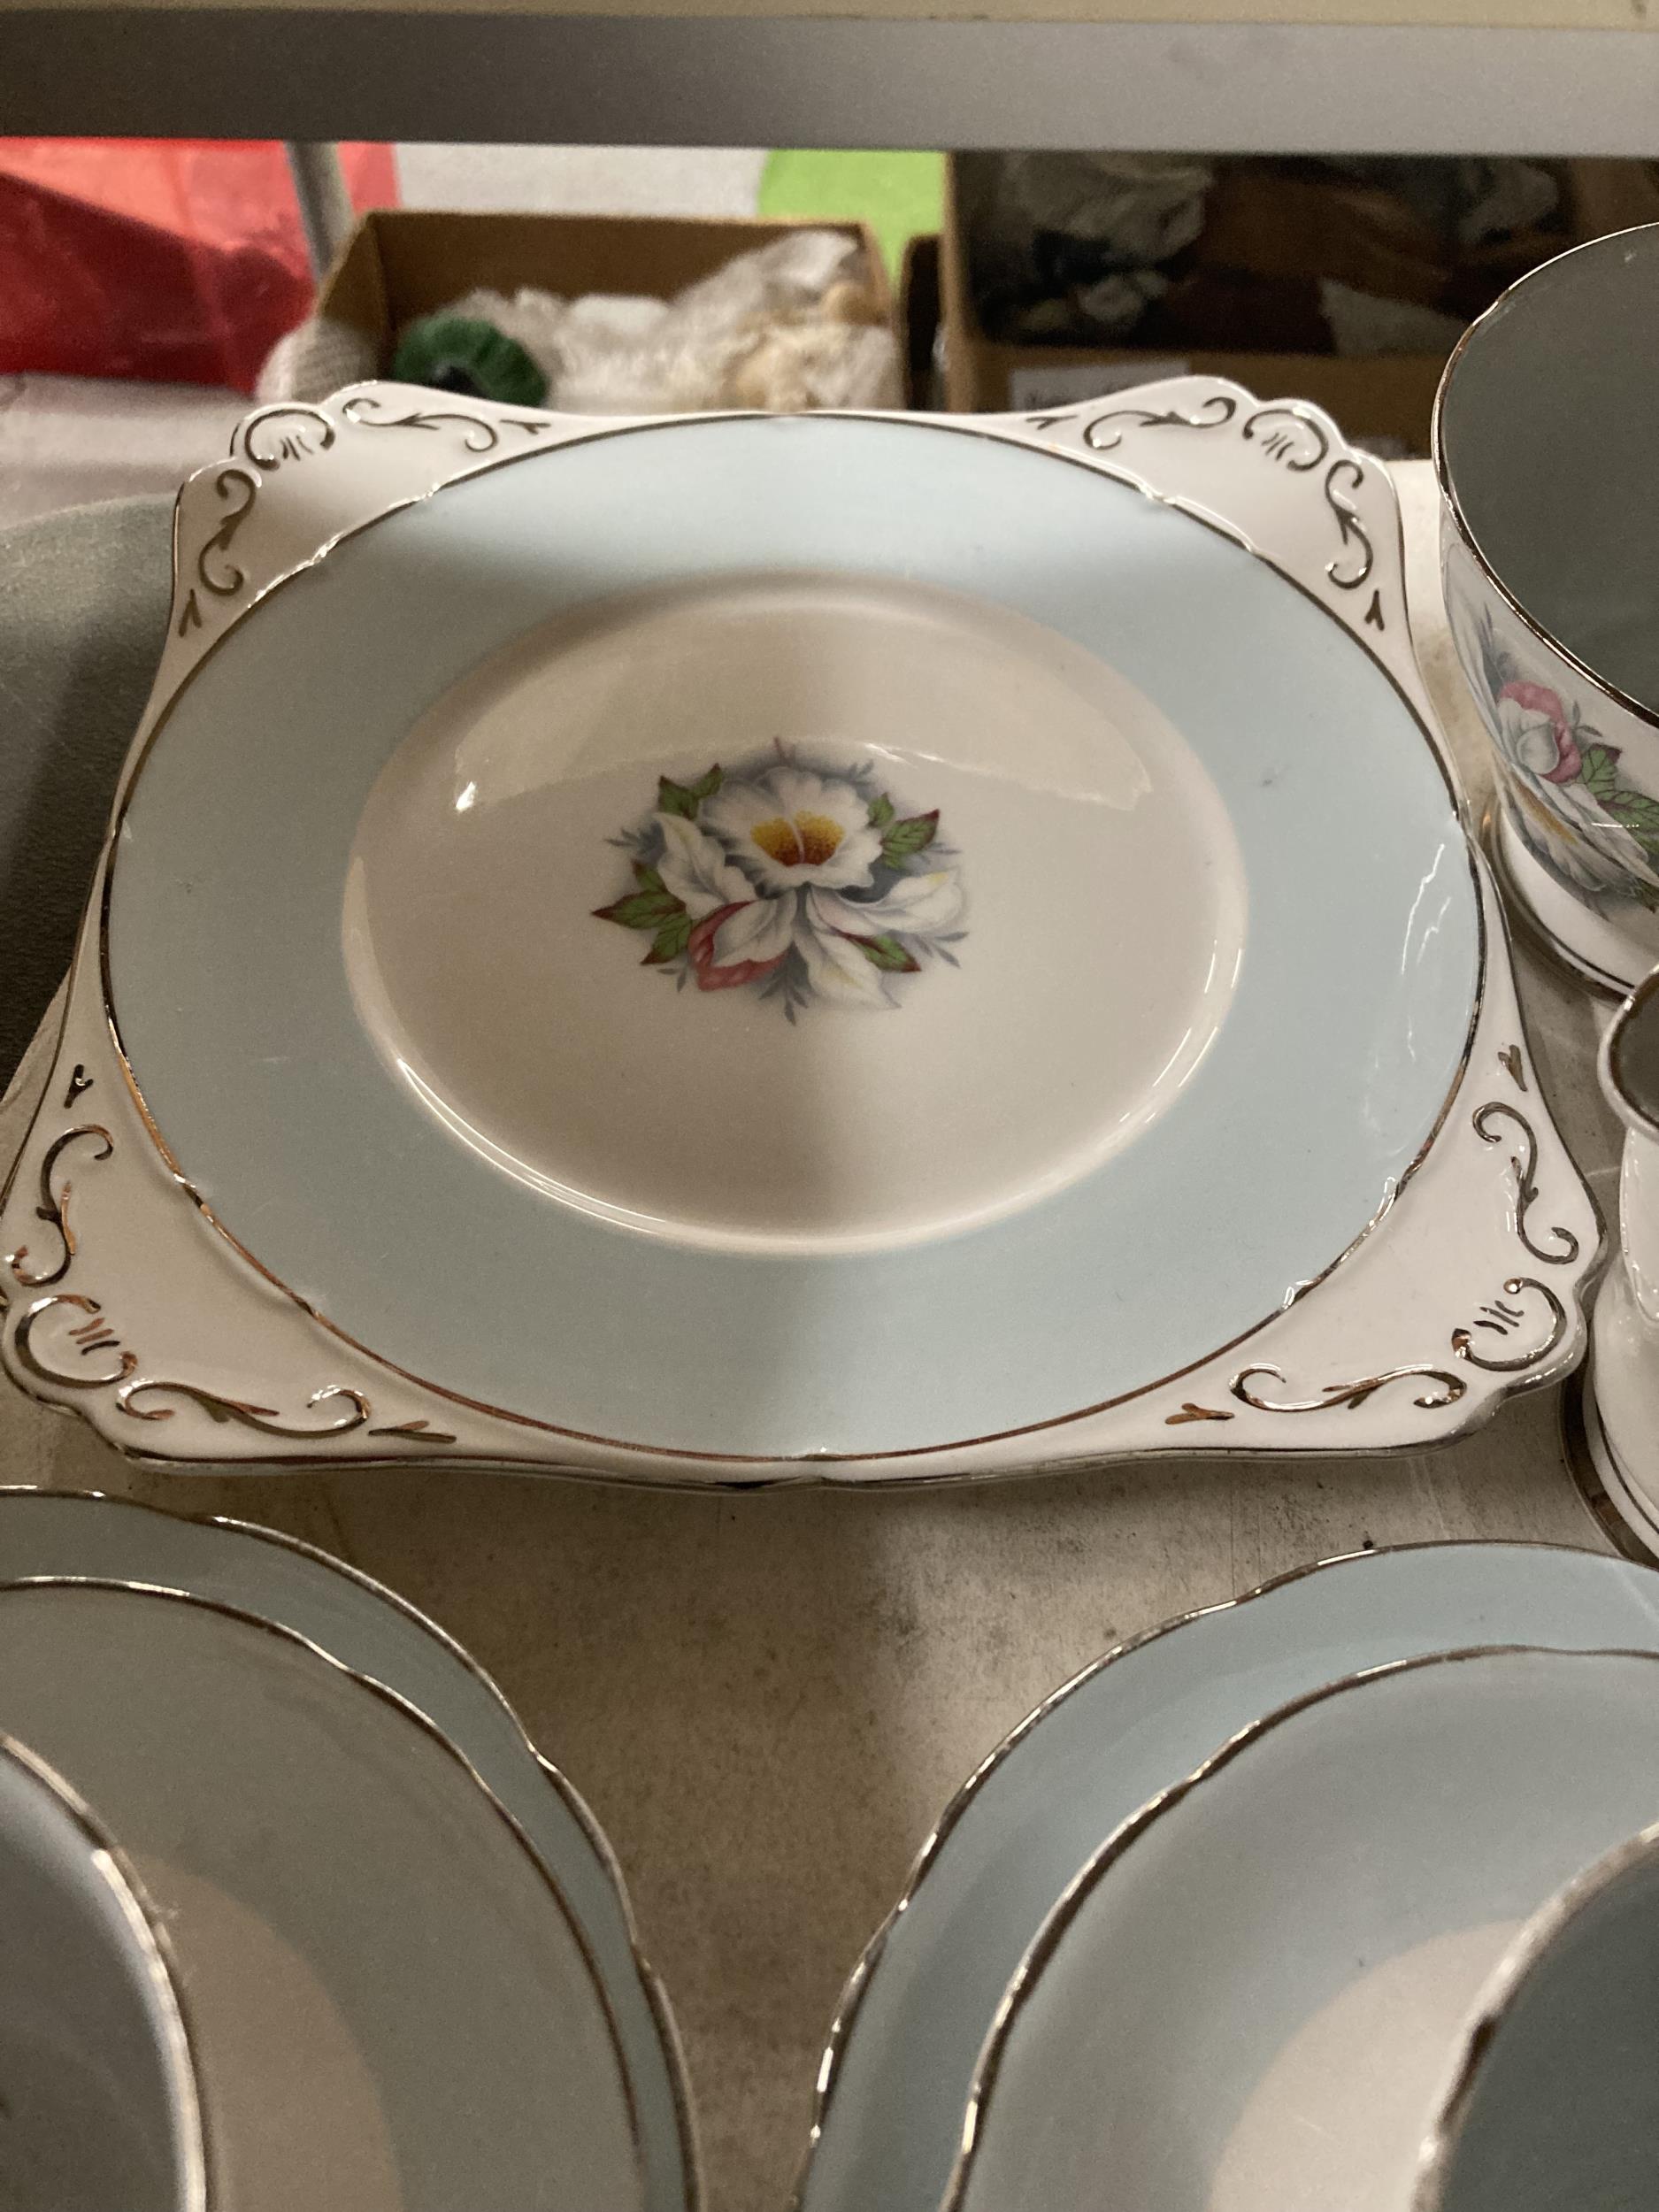 A ROYAL STAFFORD 'WHITE LADY' TEASET TO INCLUDE A CAKE PLATE, CUPS, SAUCERS, SIDE PLATES, CREAM - Image 4 of 4